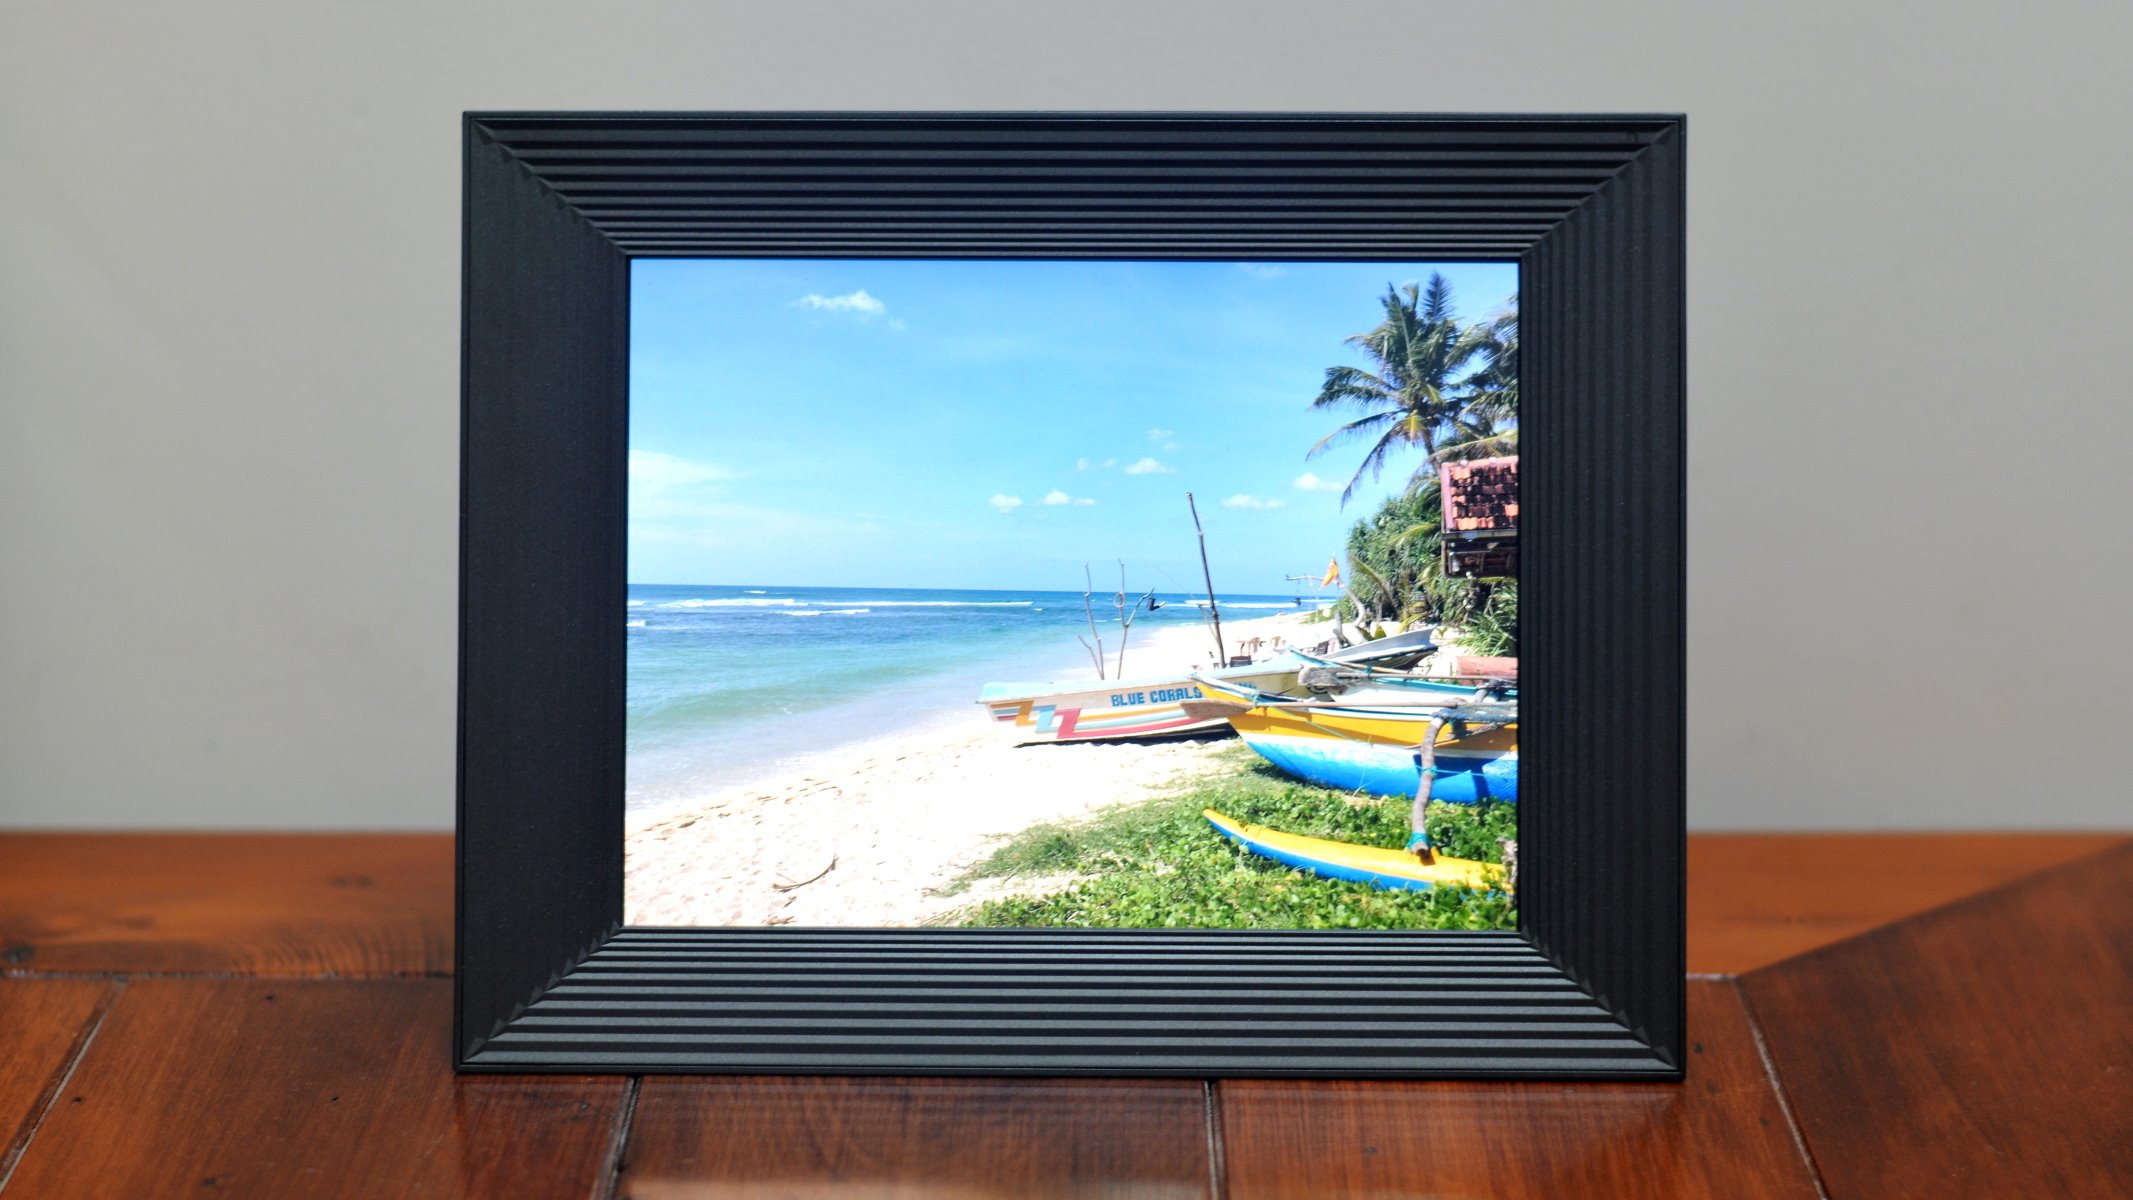 What To Look For In Digital Picture Frames